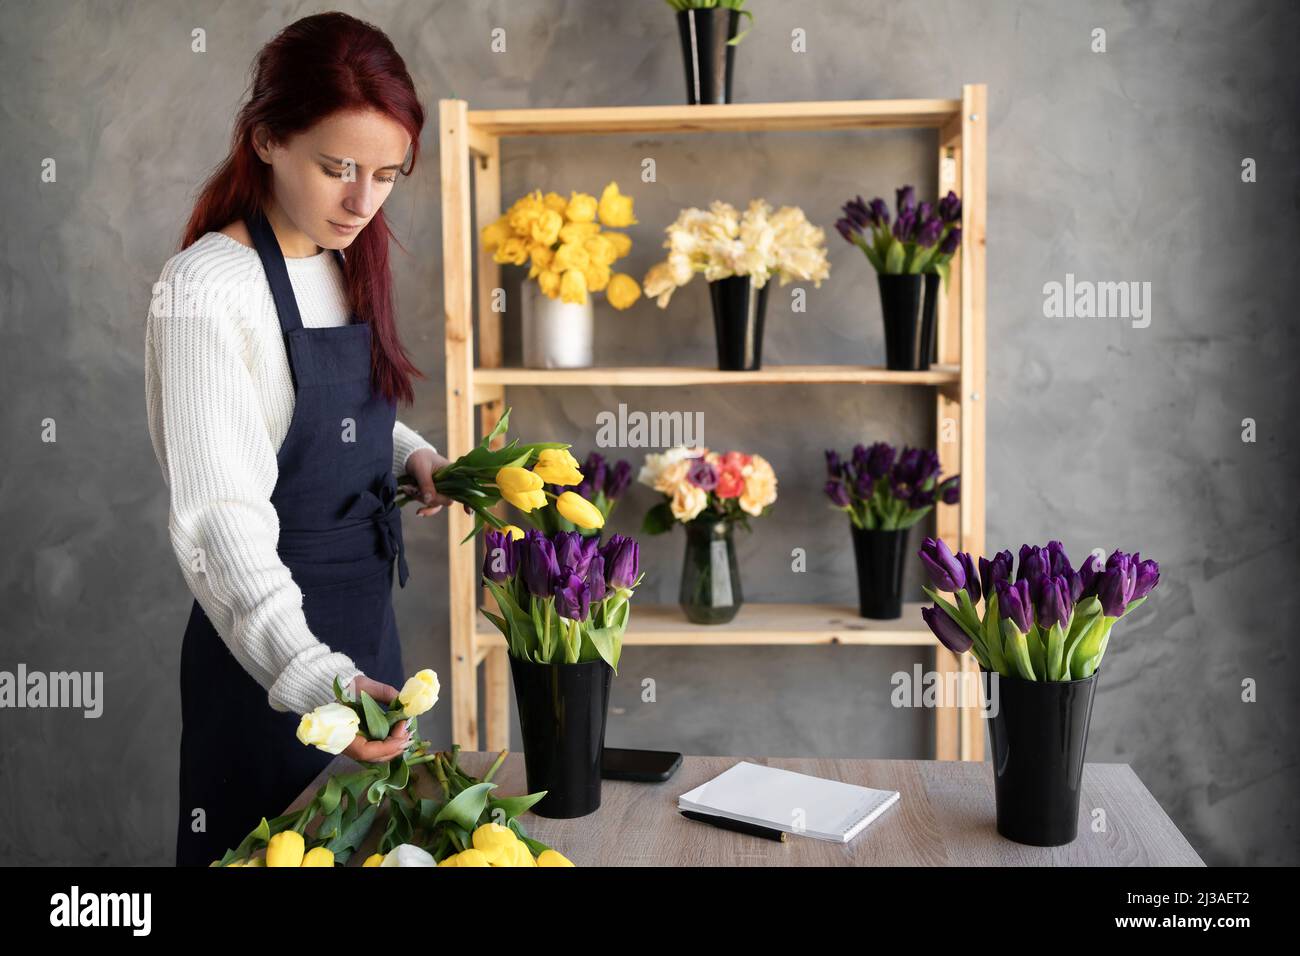 Small business. a woman florist in a flower shop near a showcase with tulips in an apron collects a bouquet of tulip flowers. Flower delivery Stock Photo